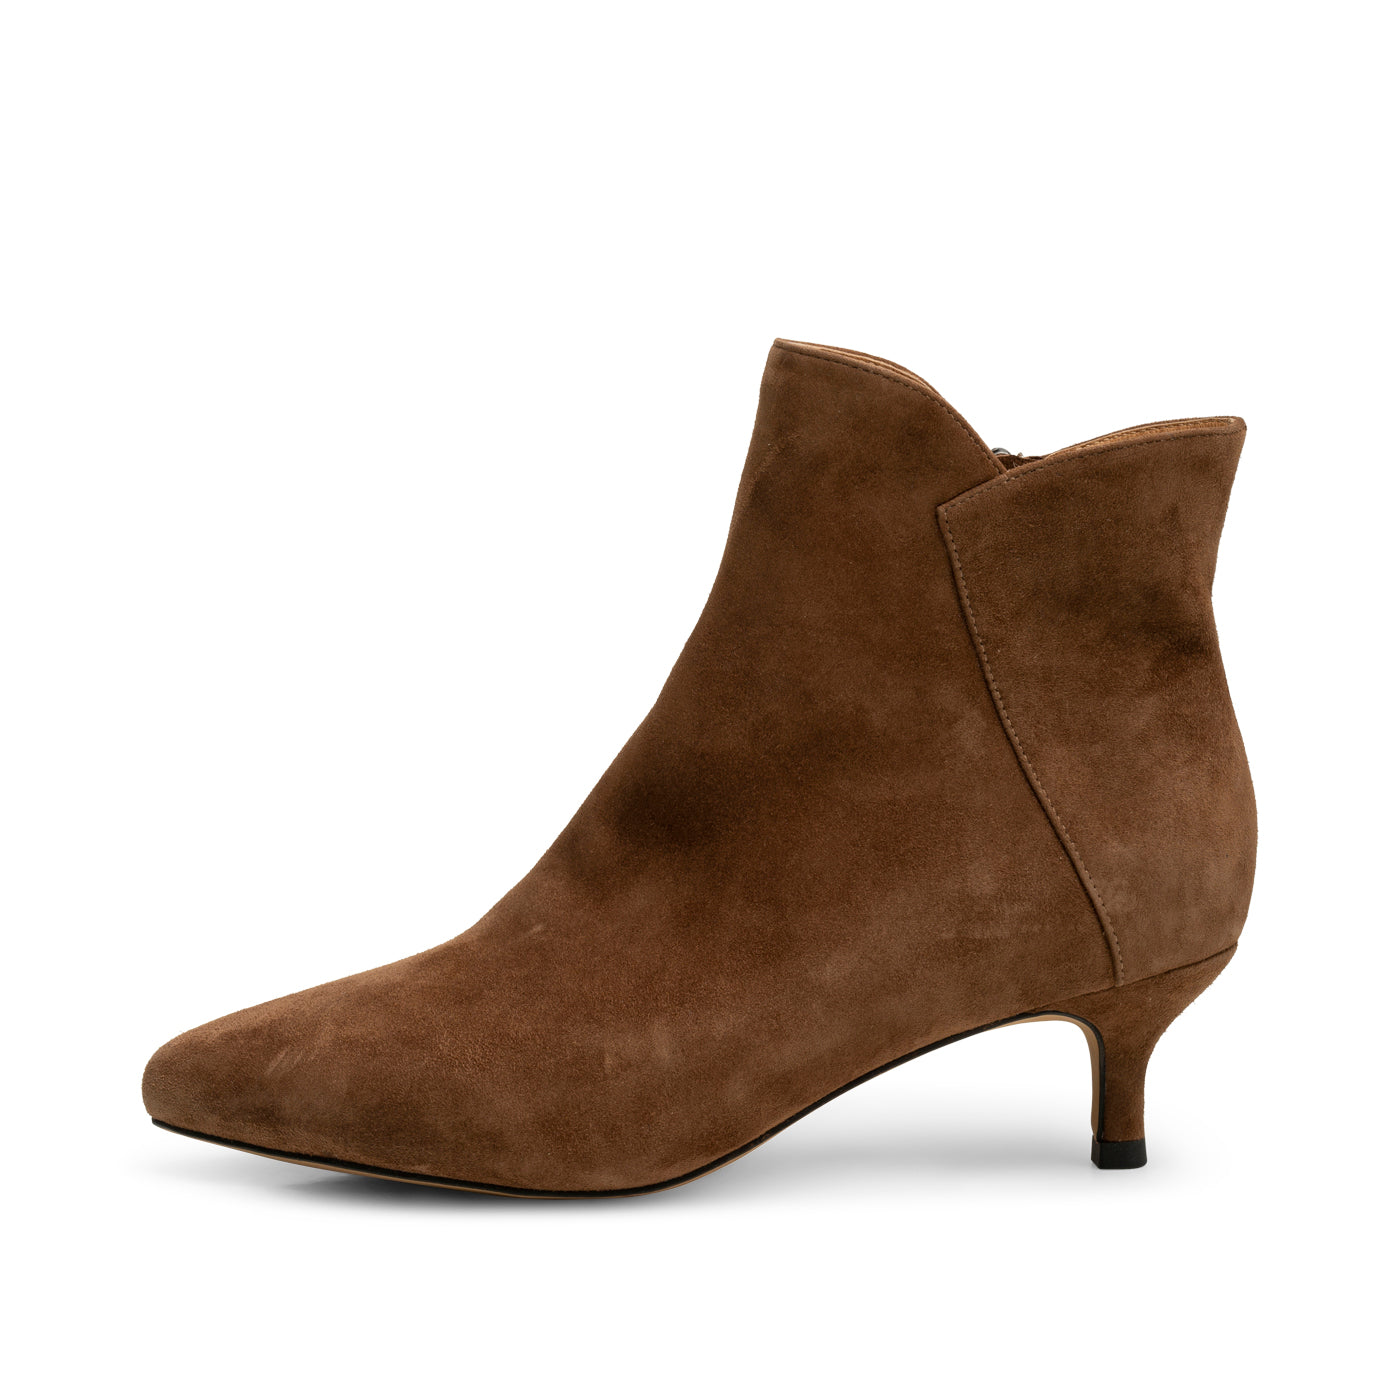 Saga Suede Boot in Tan by Shoe The Bear